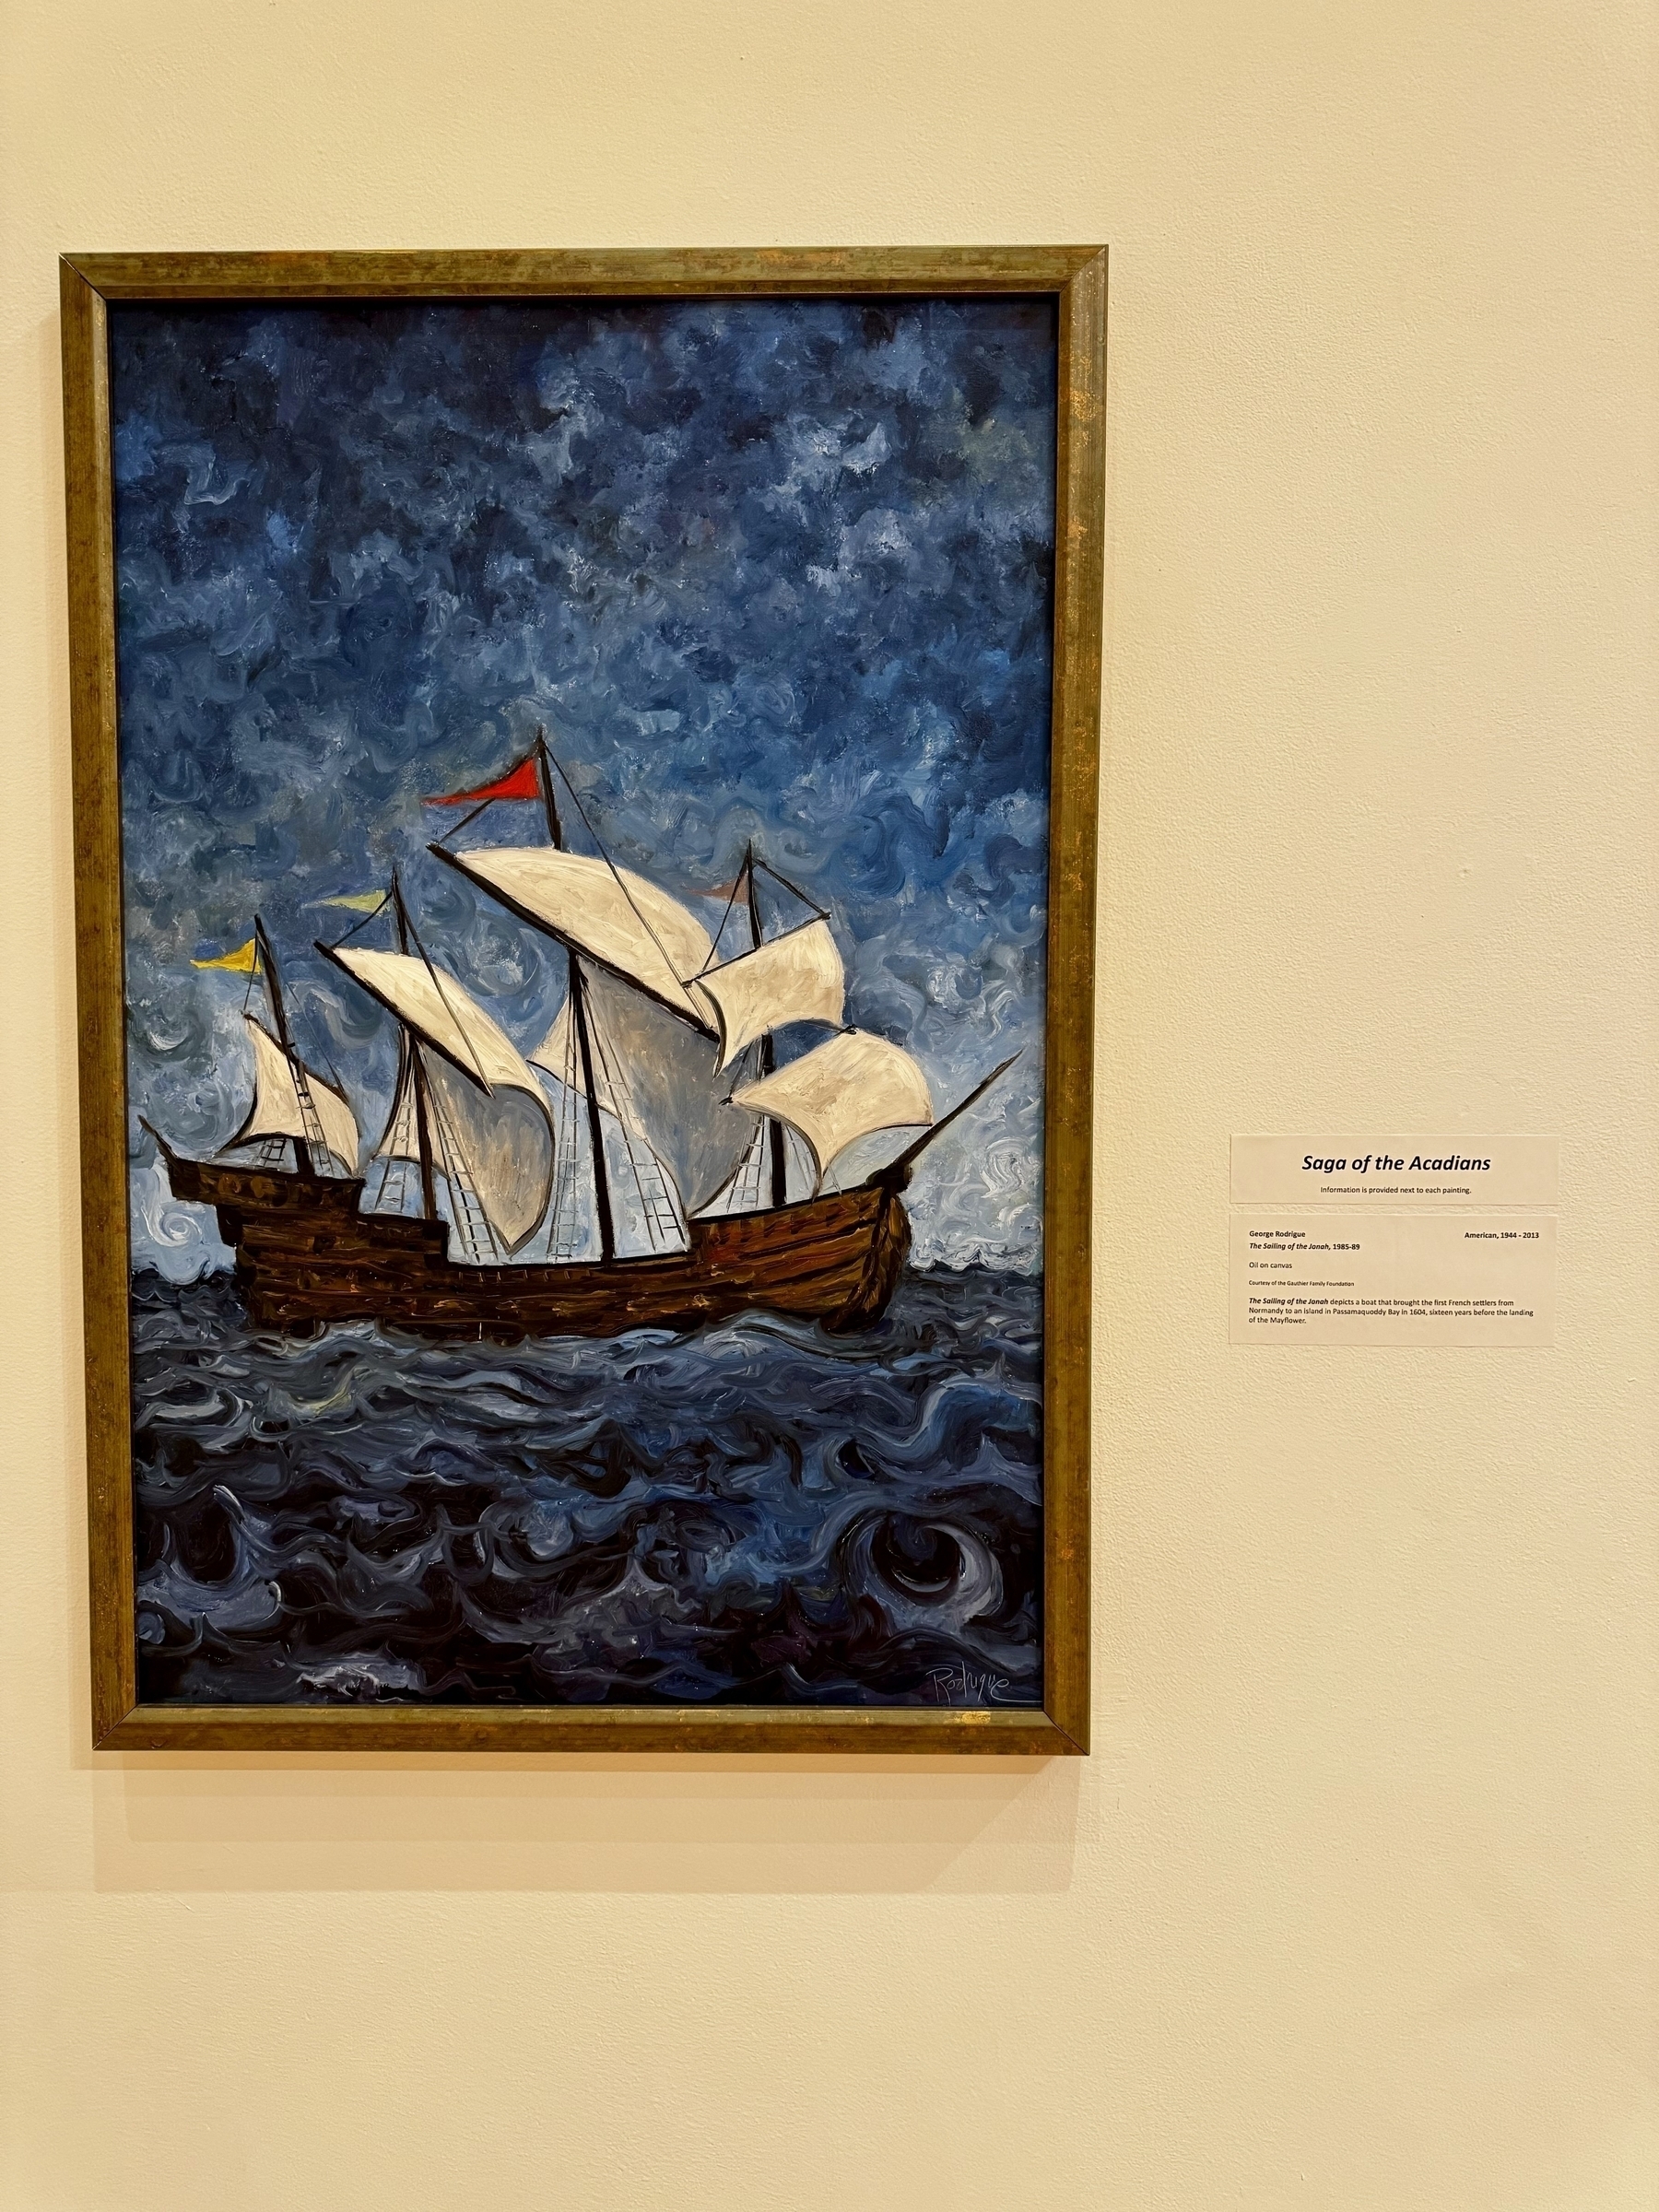 A framed painting depicts a sailing ship navigating through choppy waters under a turbulent, cloudy sky.